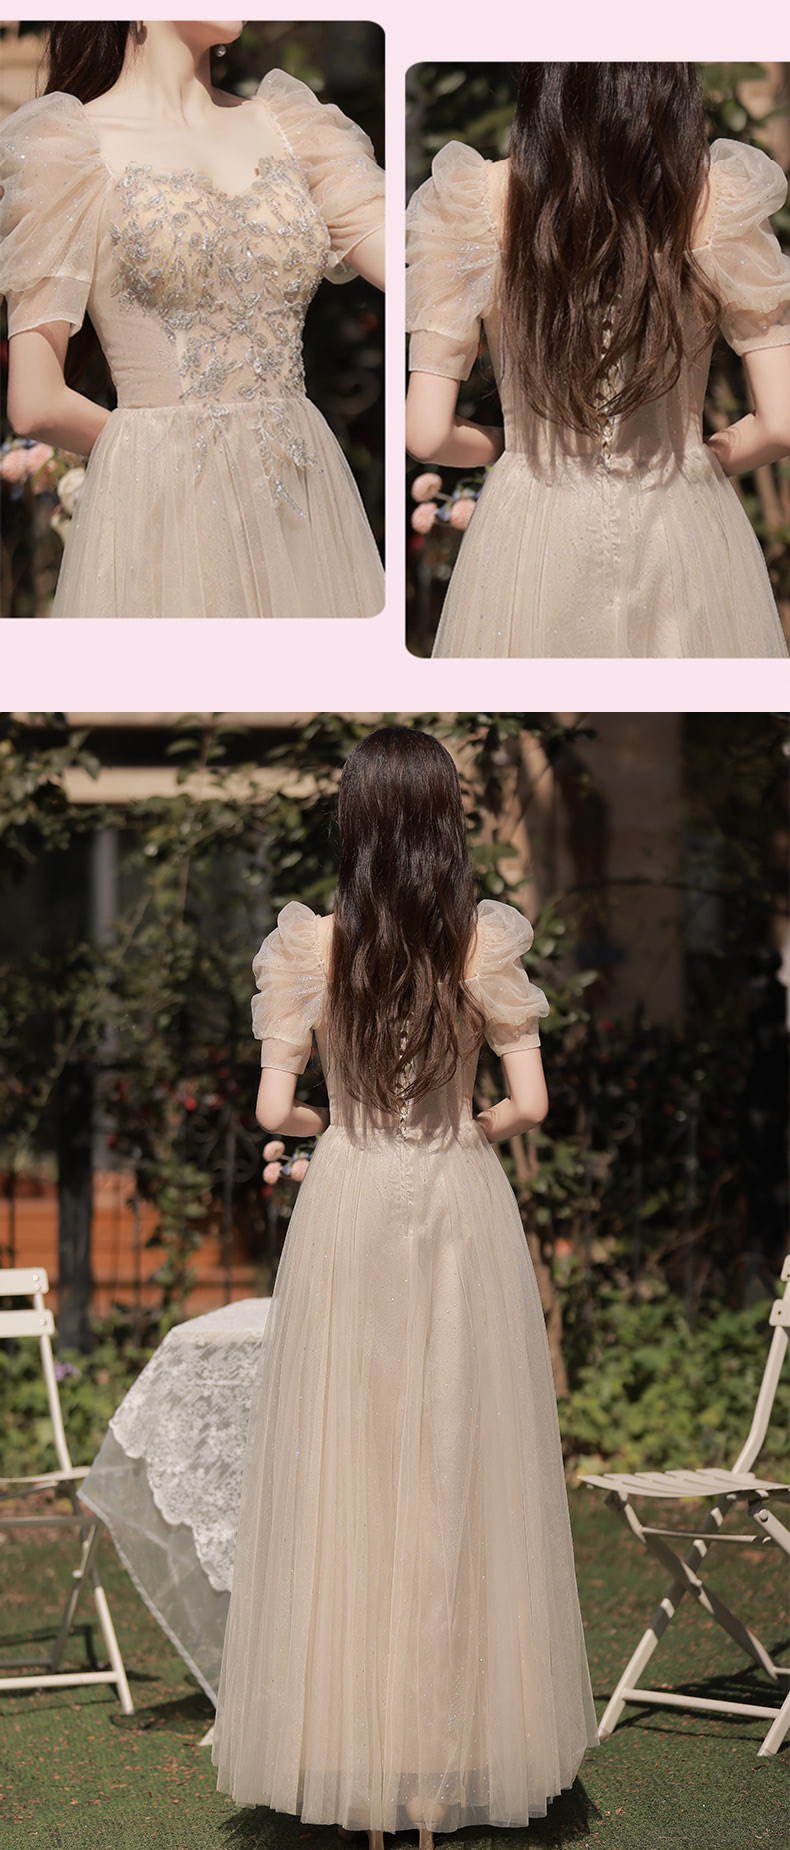 Formal-Apricot-Bridesmaid-Dress-Evening-Gown-for-Wedding-Party18.jpg